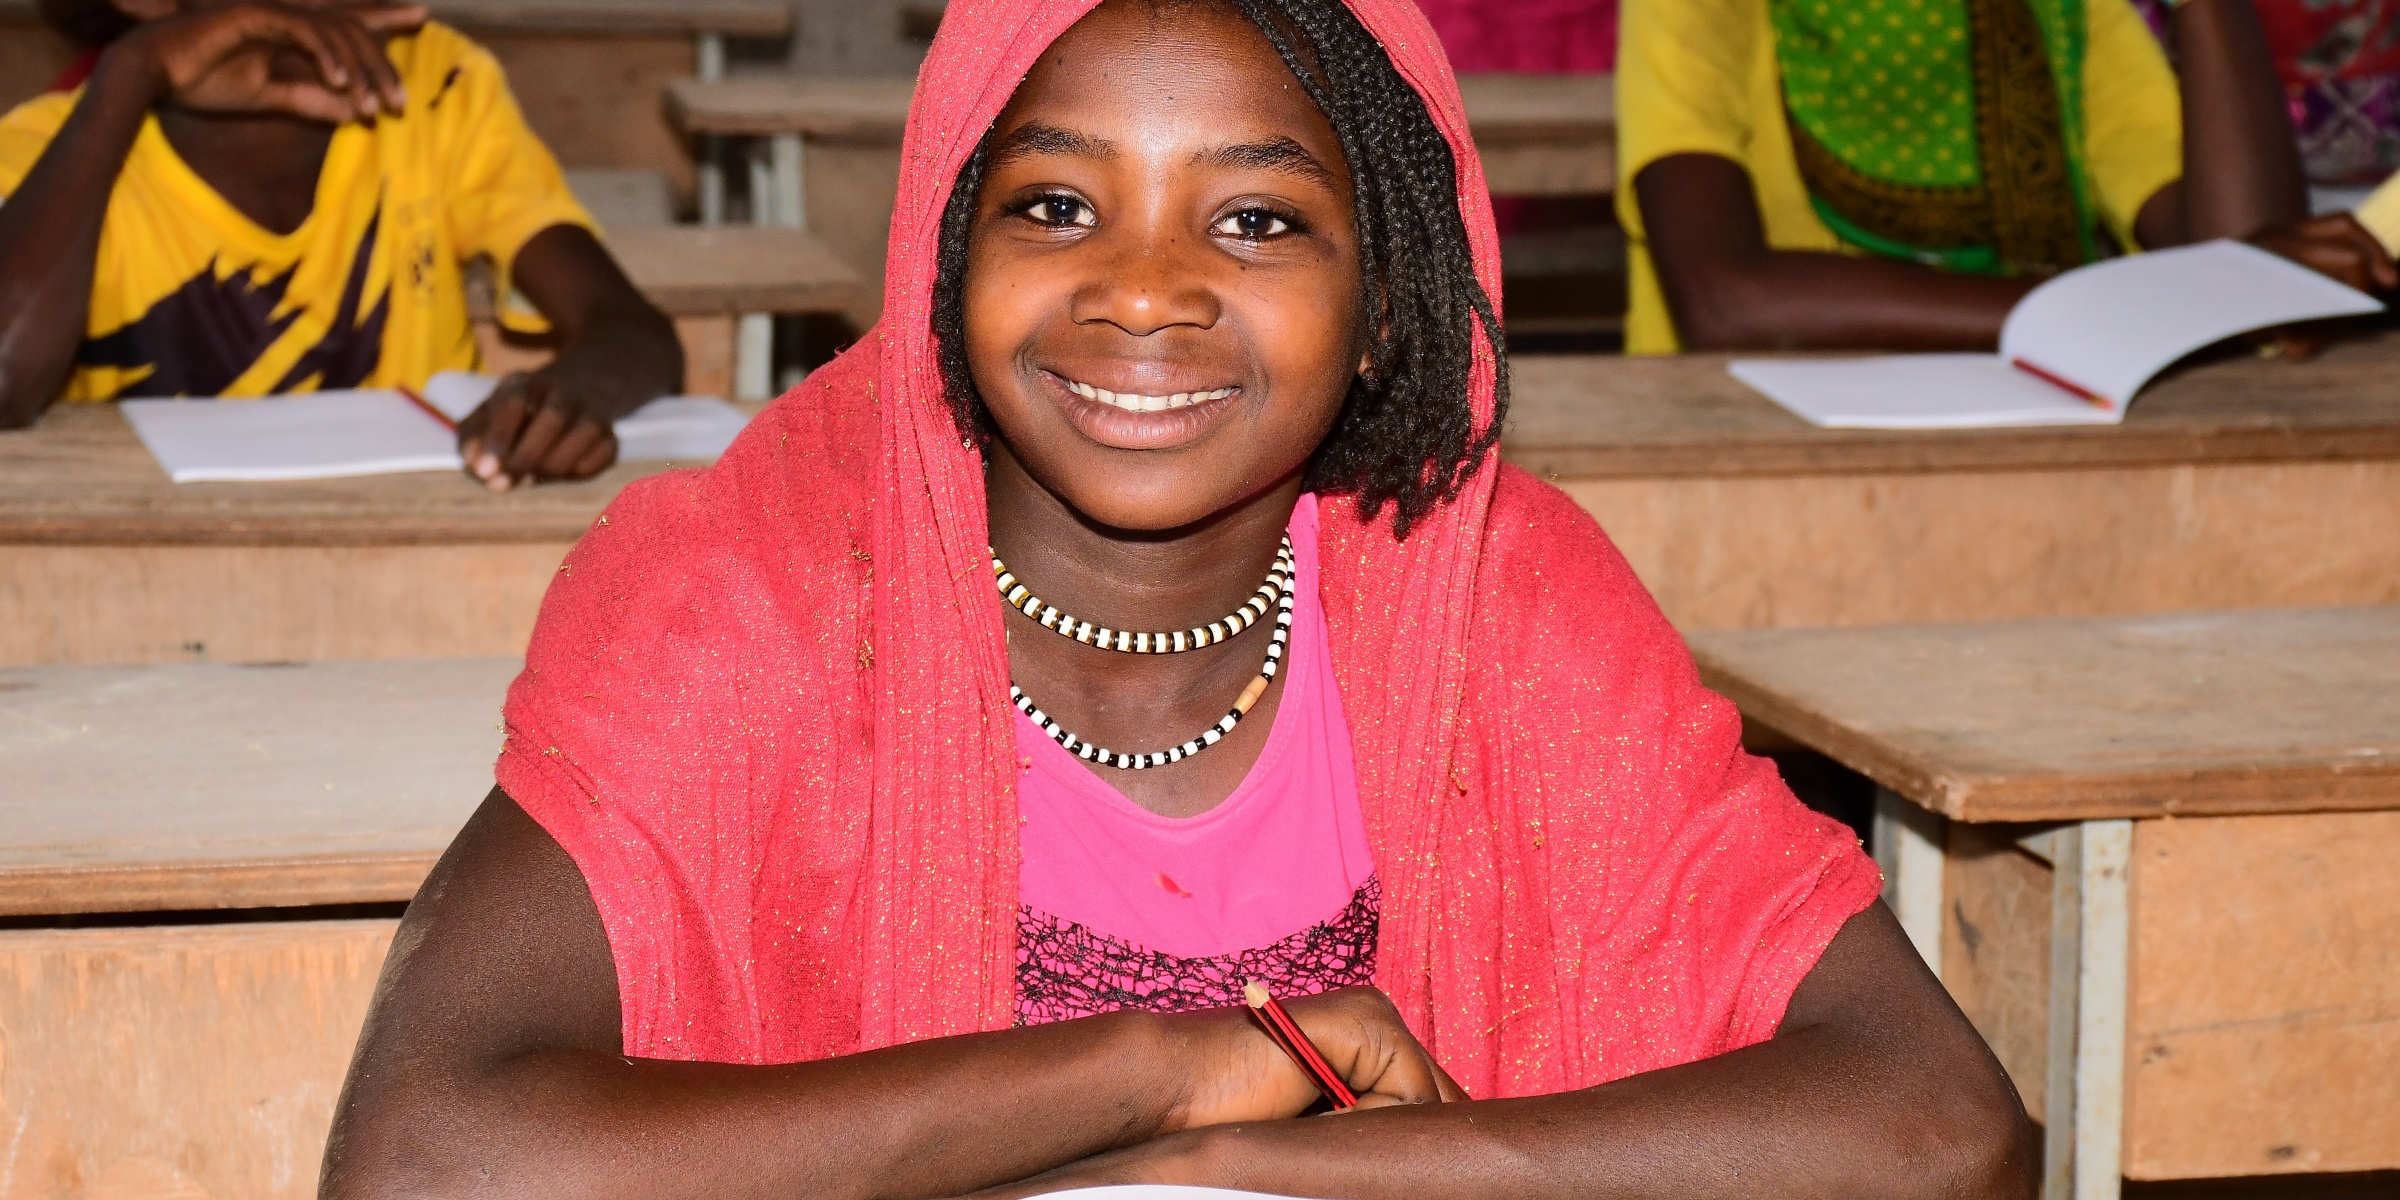 A radiant smile of a 10-year-old girl. Rekia is smart and resilient with high hopes for a better future in her new school. Credit: UNICEF Eritrea/Guiussepi